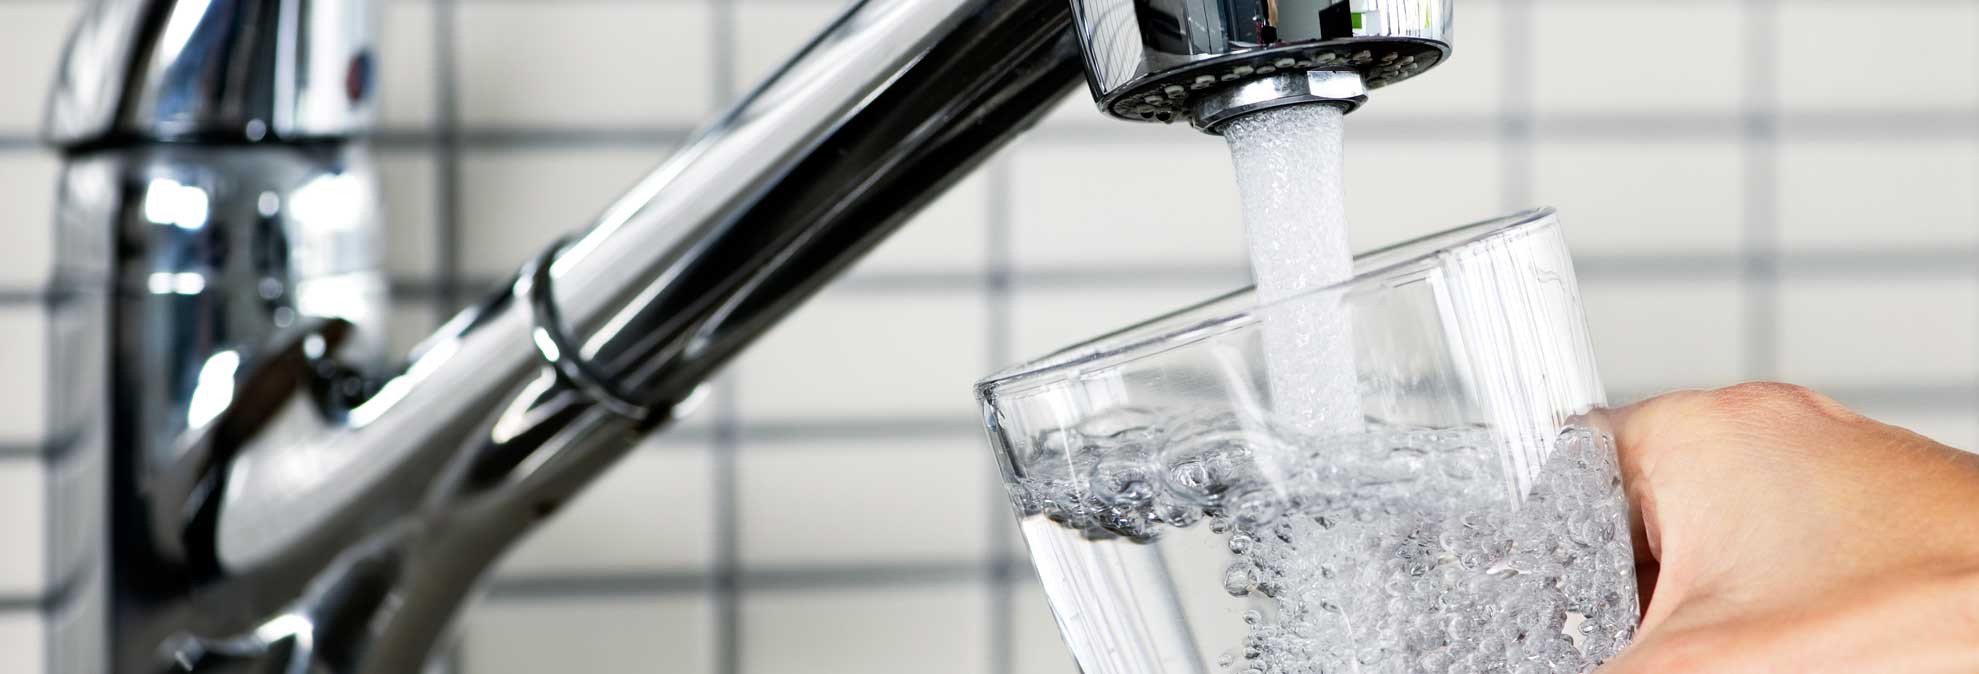 Tips for improving the taste and purity of your drinking water